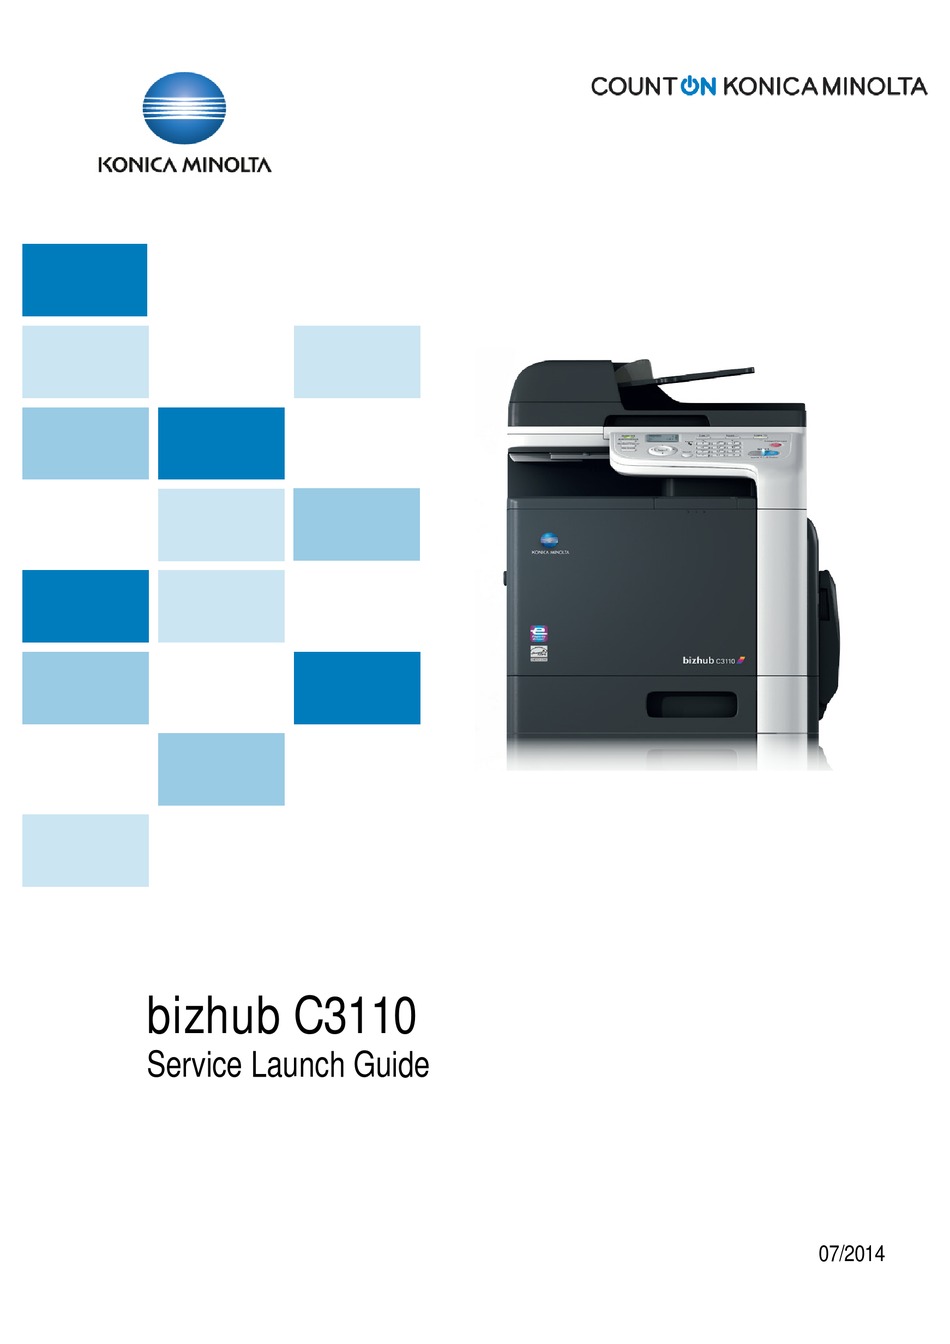 Bizhub 20p Driver Windows 10 Konica Minolta Bizhub 20p Driver Download All Drivers Available For Download Have Been Scanned By Antivirus Program